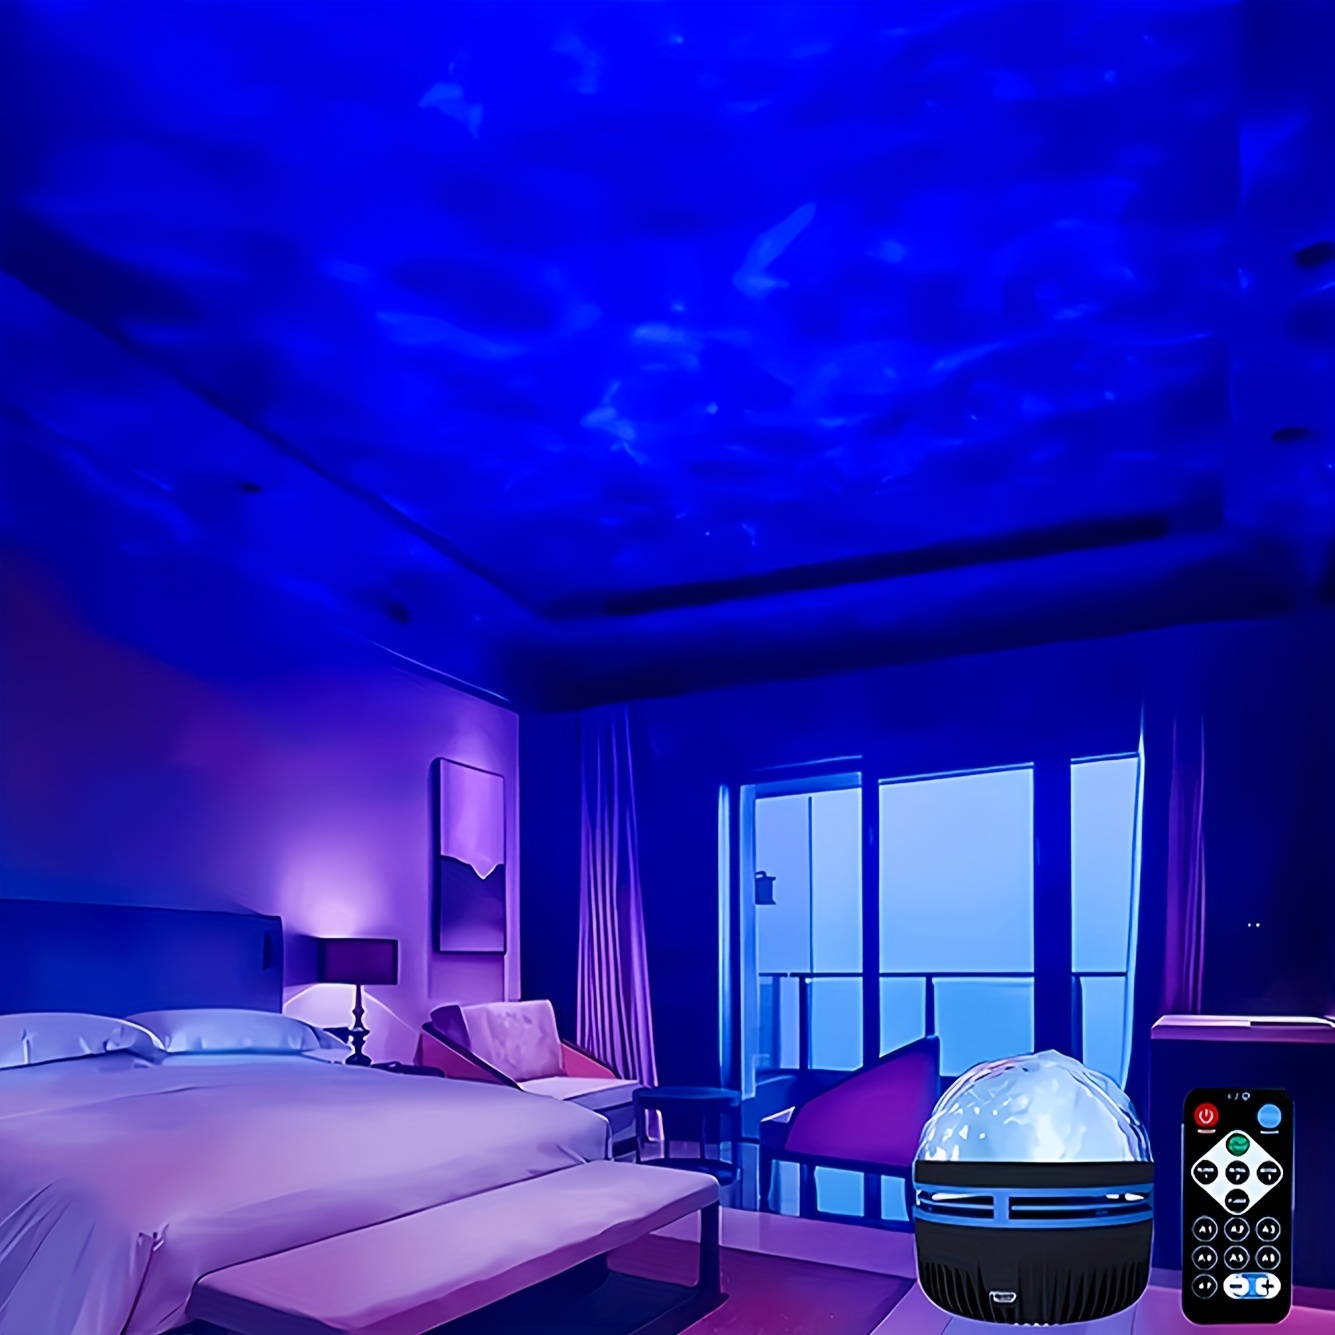 

1pc Galaxy Projector Water Ripple Led Night Light, Usb Powered Starry Light With Remote Control Bedroom Atmosphere, Ideal For Wedding, Christmas, Halloween & Travel Eid Al-adha Mubarak